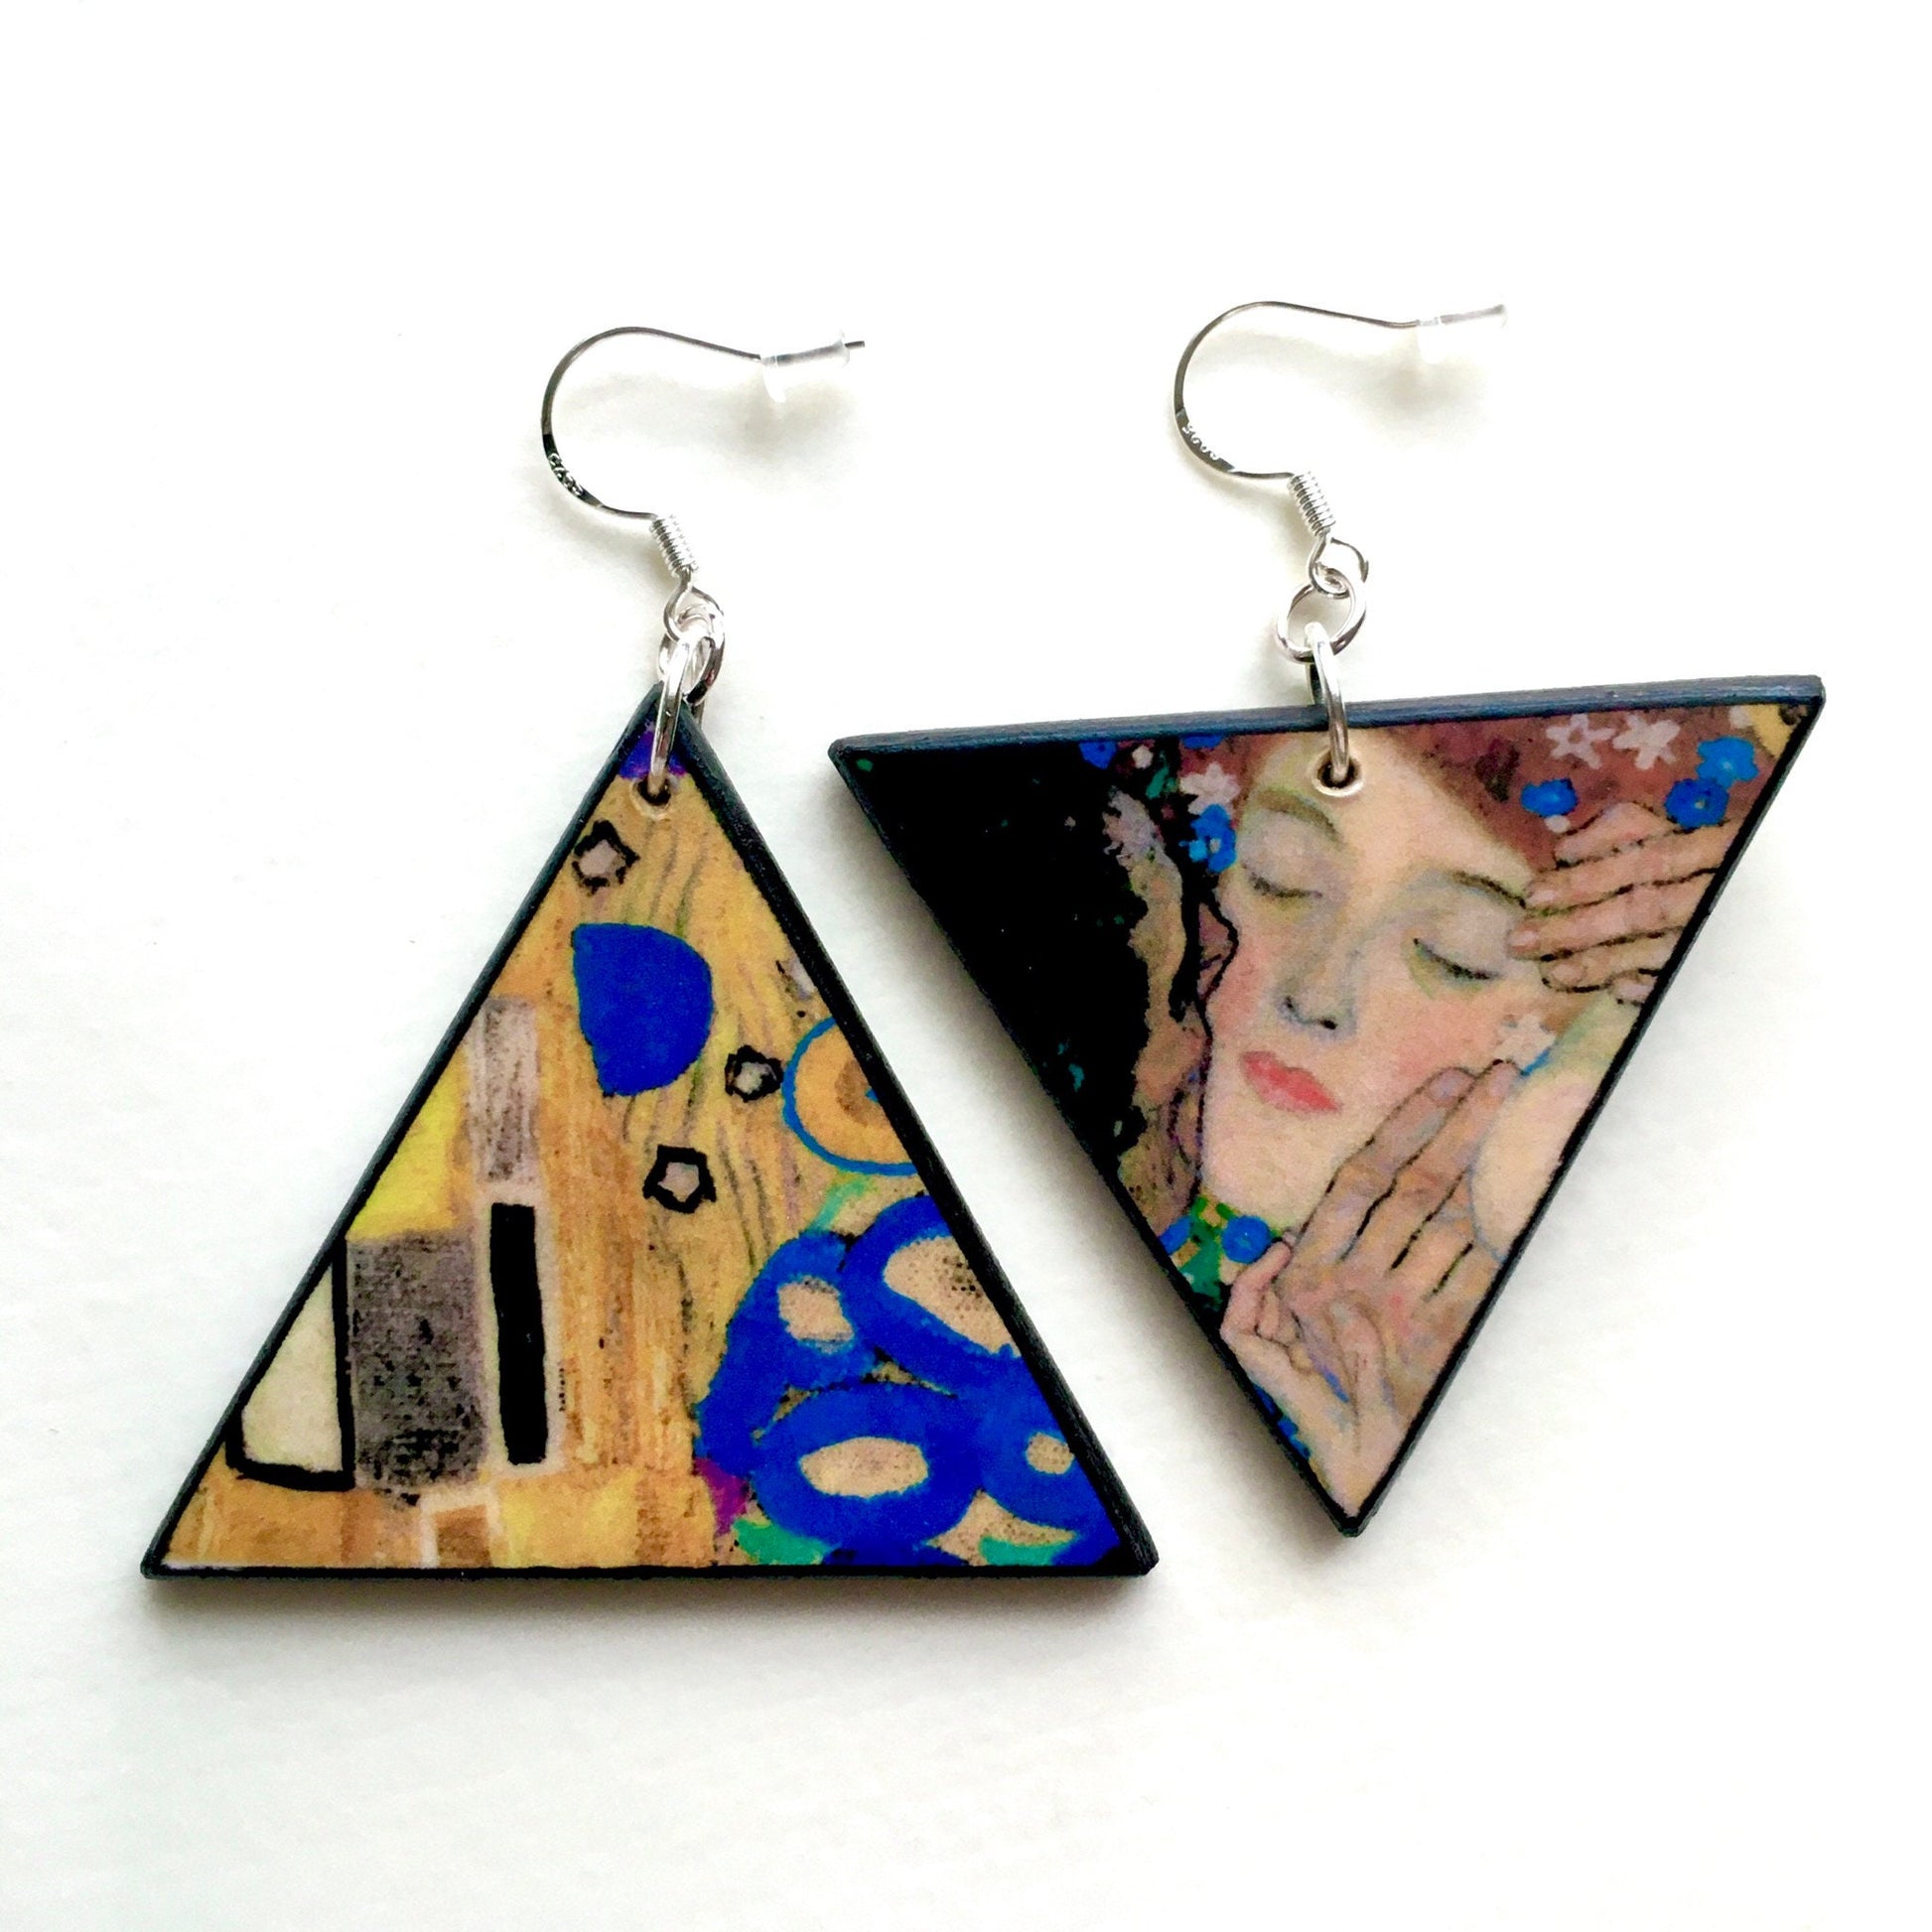 Obljewellery Earrings inspired by Gustav Klimt and his painting The Kiss to create these  triangular, mismatched, asymmetrical earrings on sustainable wood for an artsy gift.